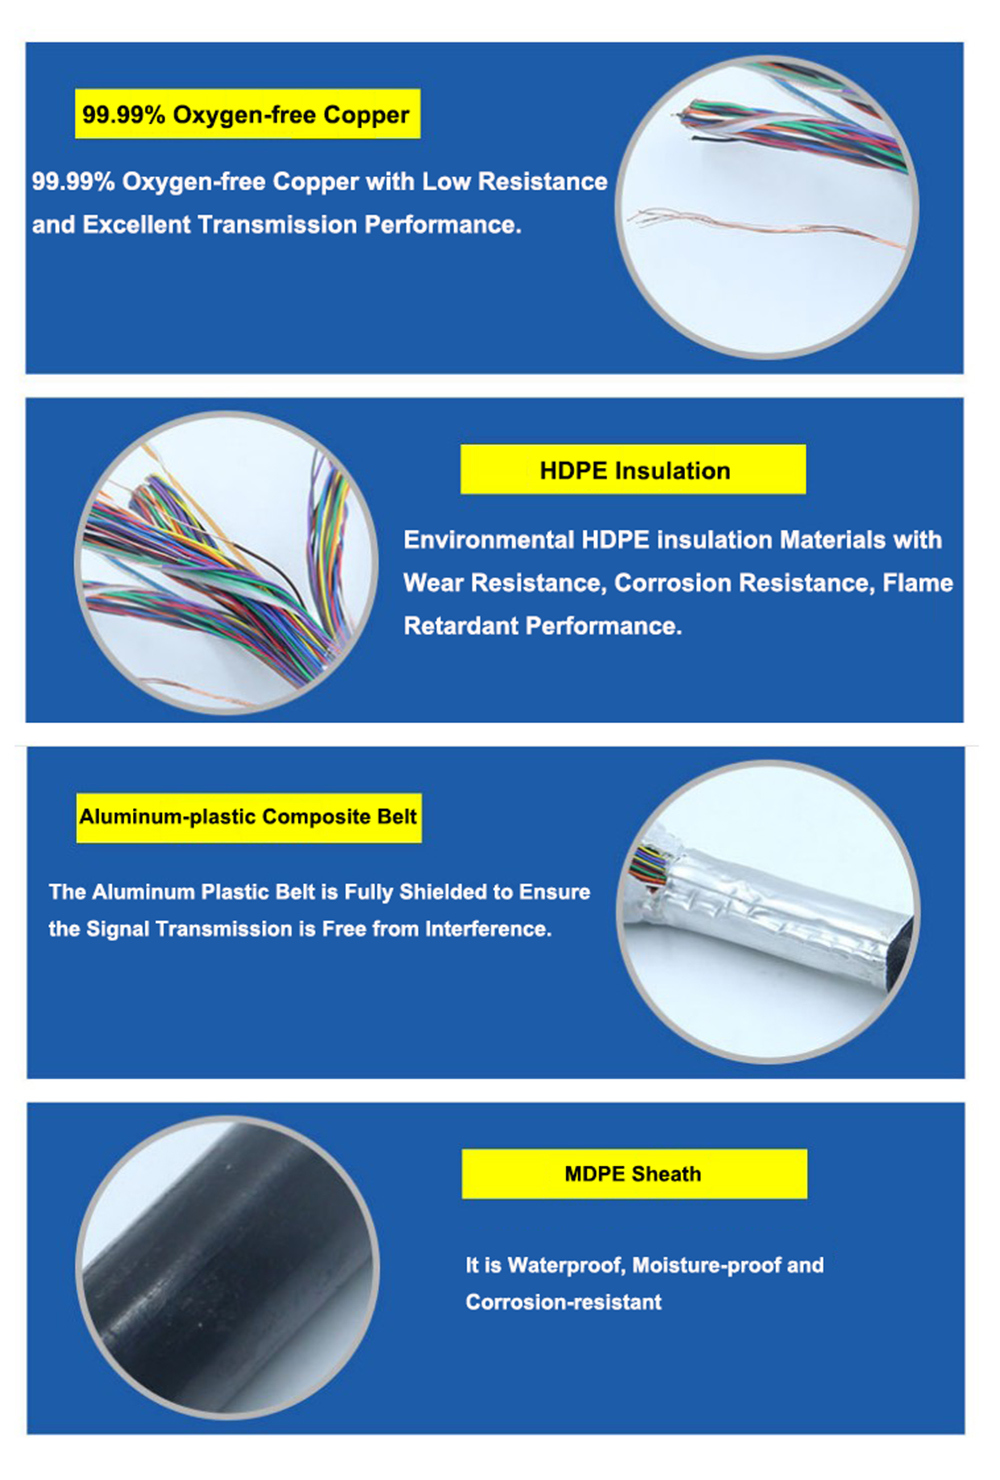 Self Supporting Aerial Copper Cable Hyac or Hyatc Telephone Cable